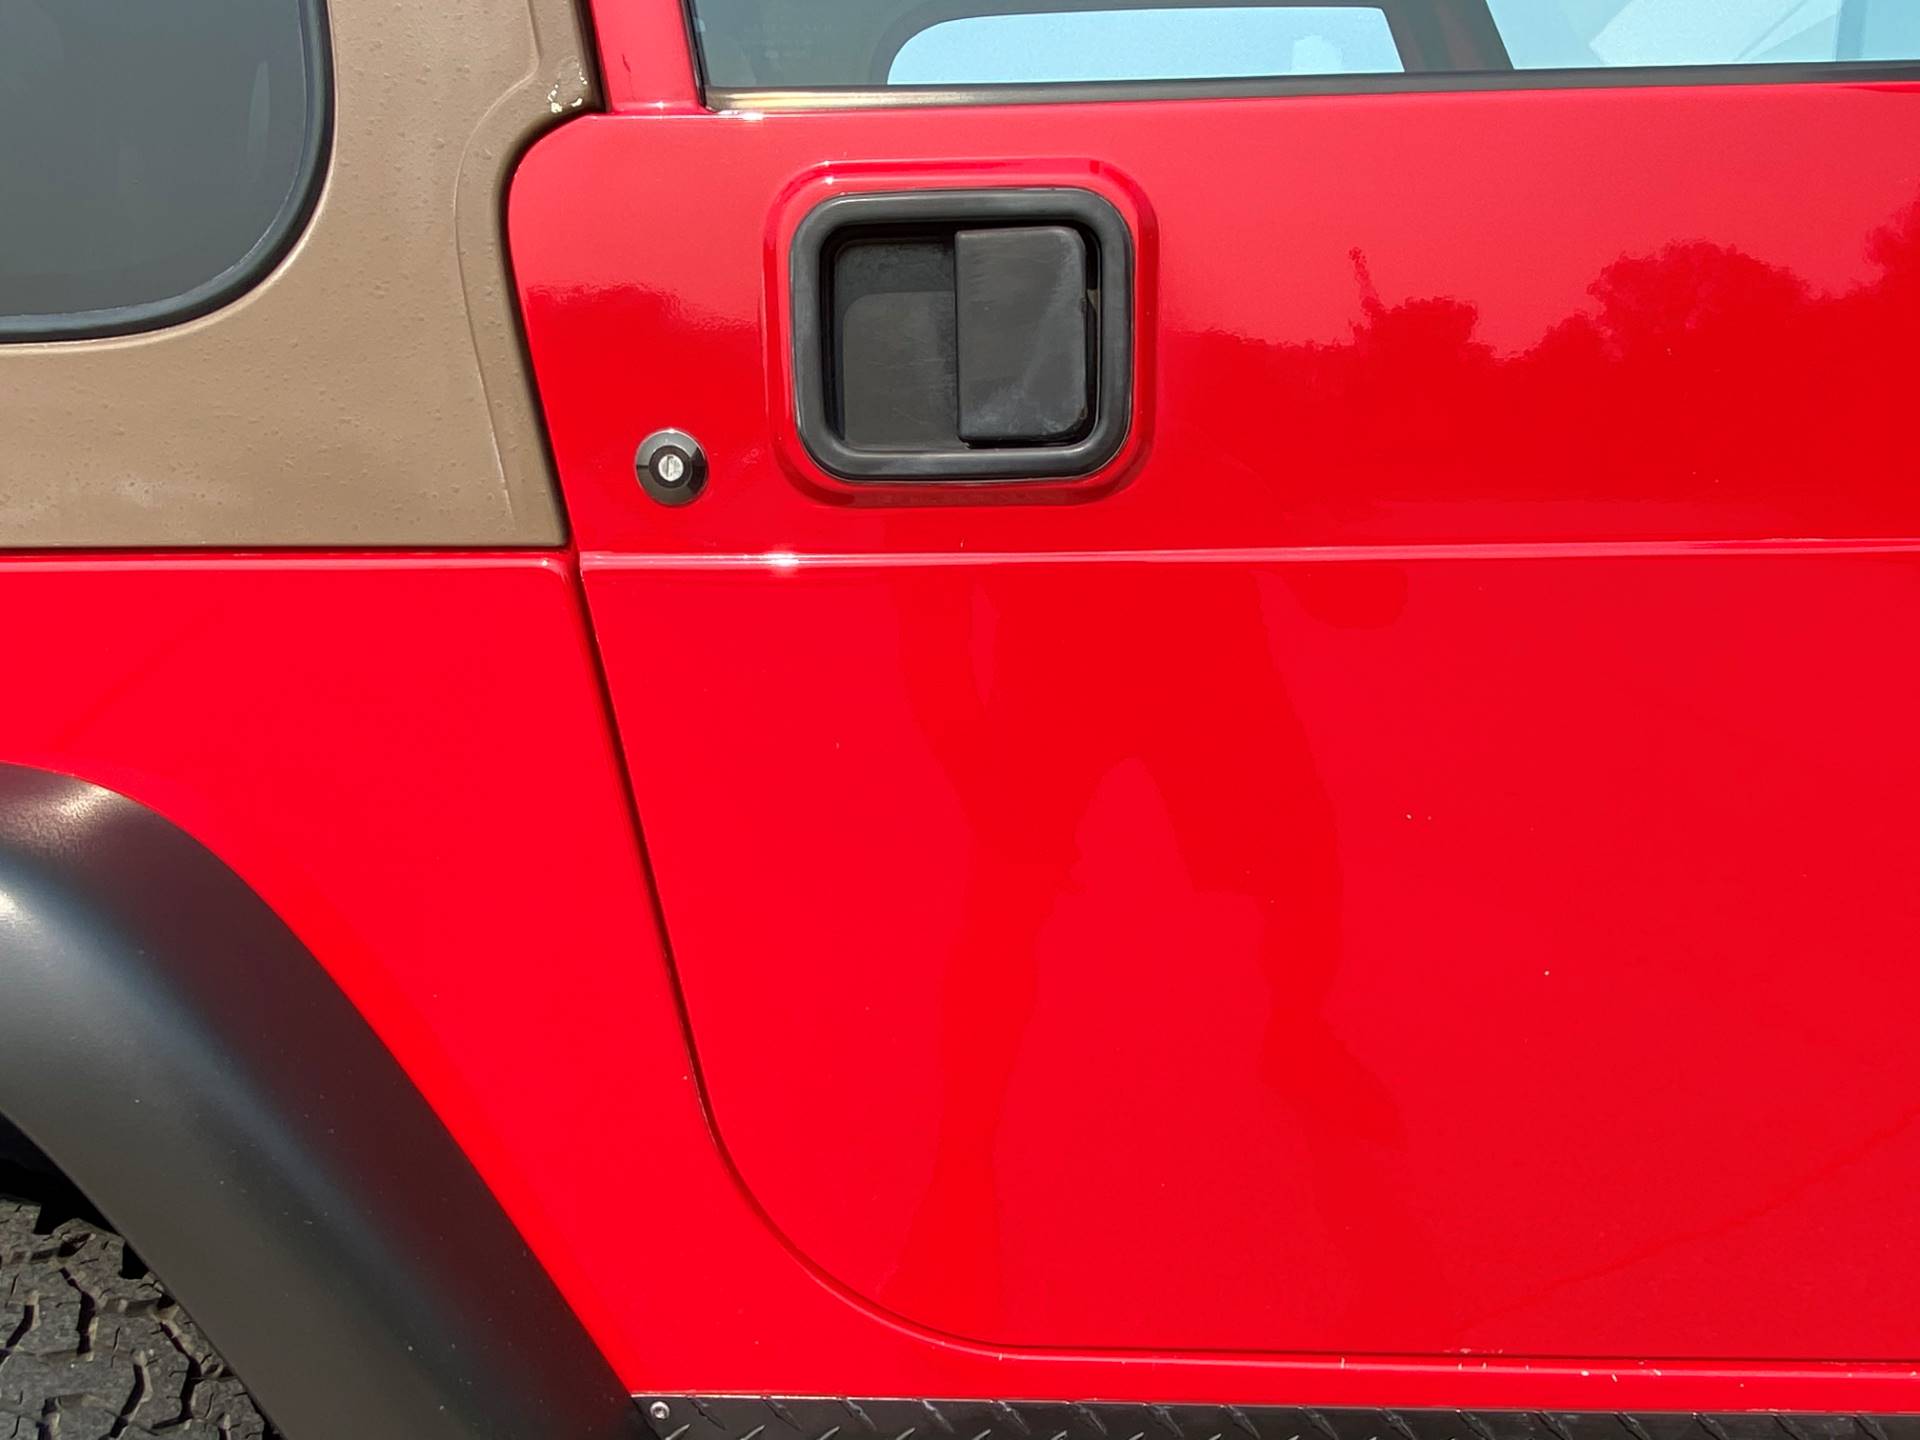 Used 2002 Jeep® Wrangler X | Automobile in Big Bend WI | 4277 Flame Red